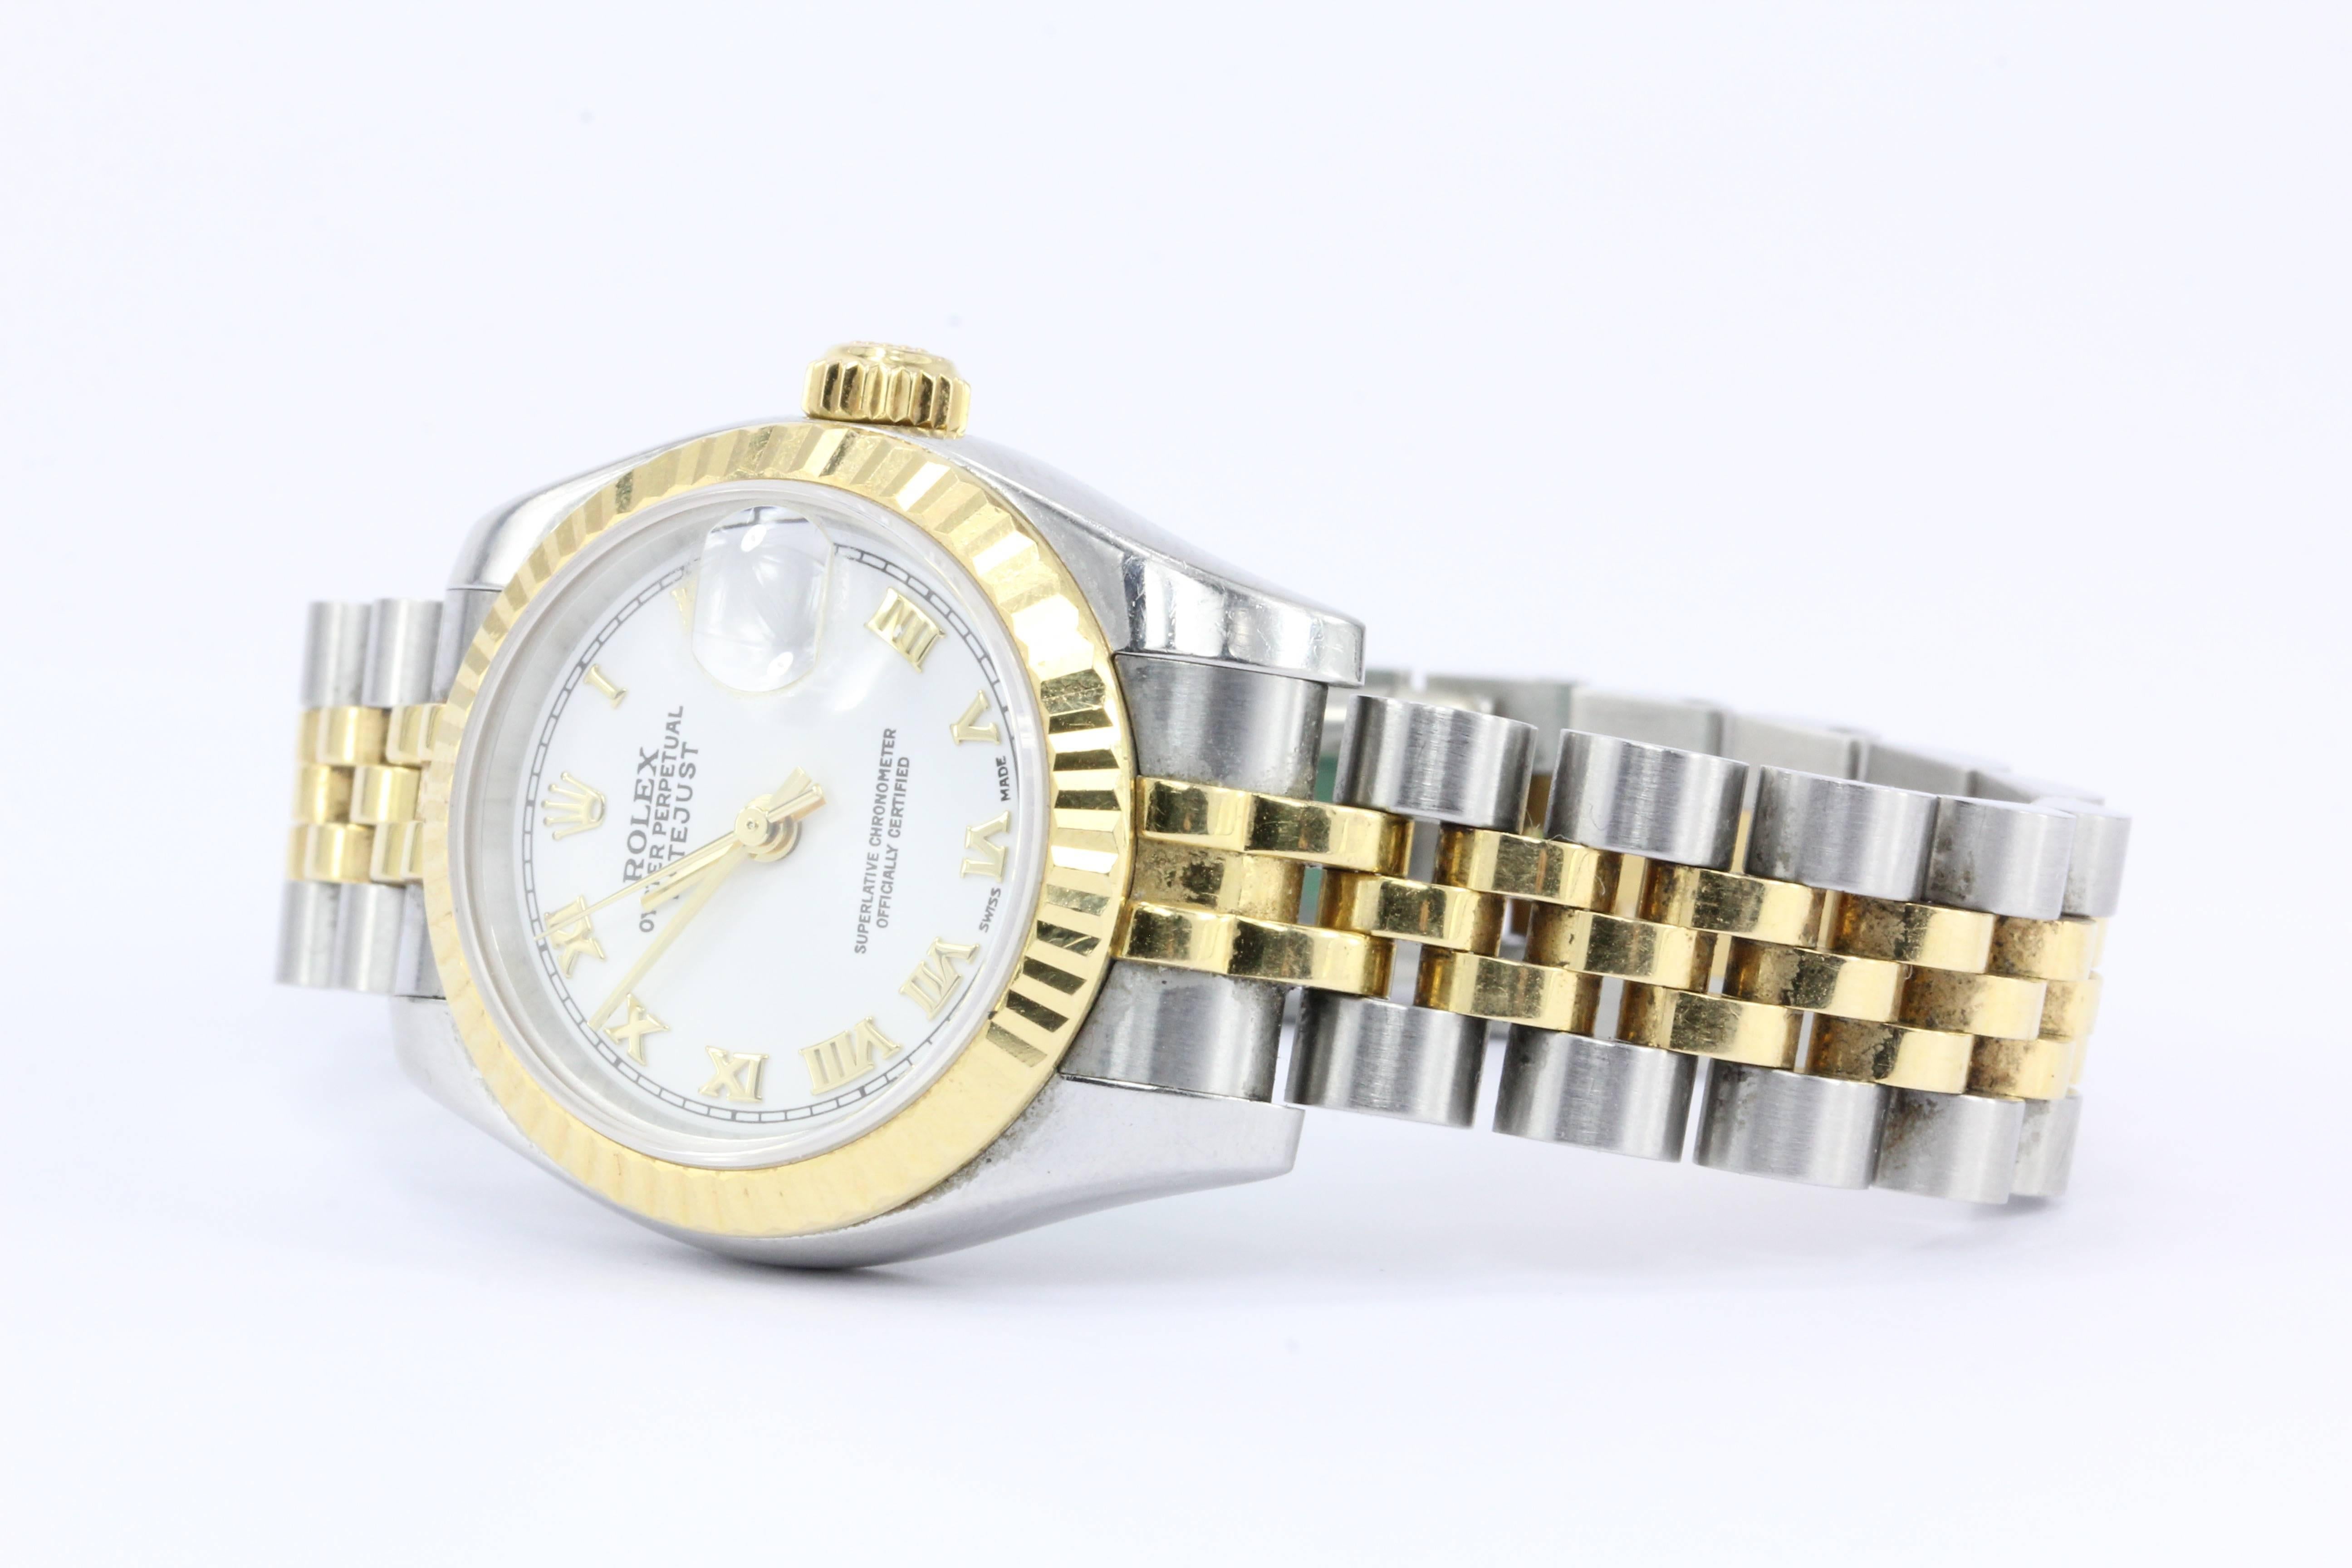 Brand: Rolex

Model: Ladies Datejust 179173 Stainless Steel White Dial with Roman Numerals

Case size: 26mm

Date: F serial number c.2012

Crystal: Sapphire 

Come with original box, no papers

Condition: Excellent, gently used estate condition